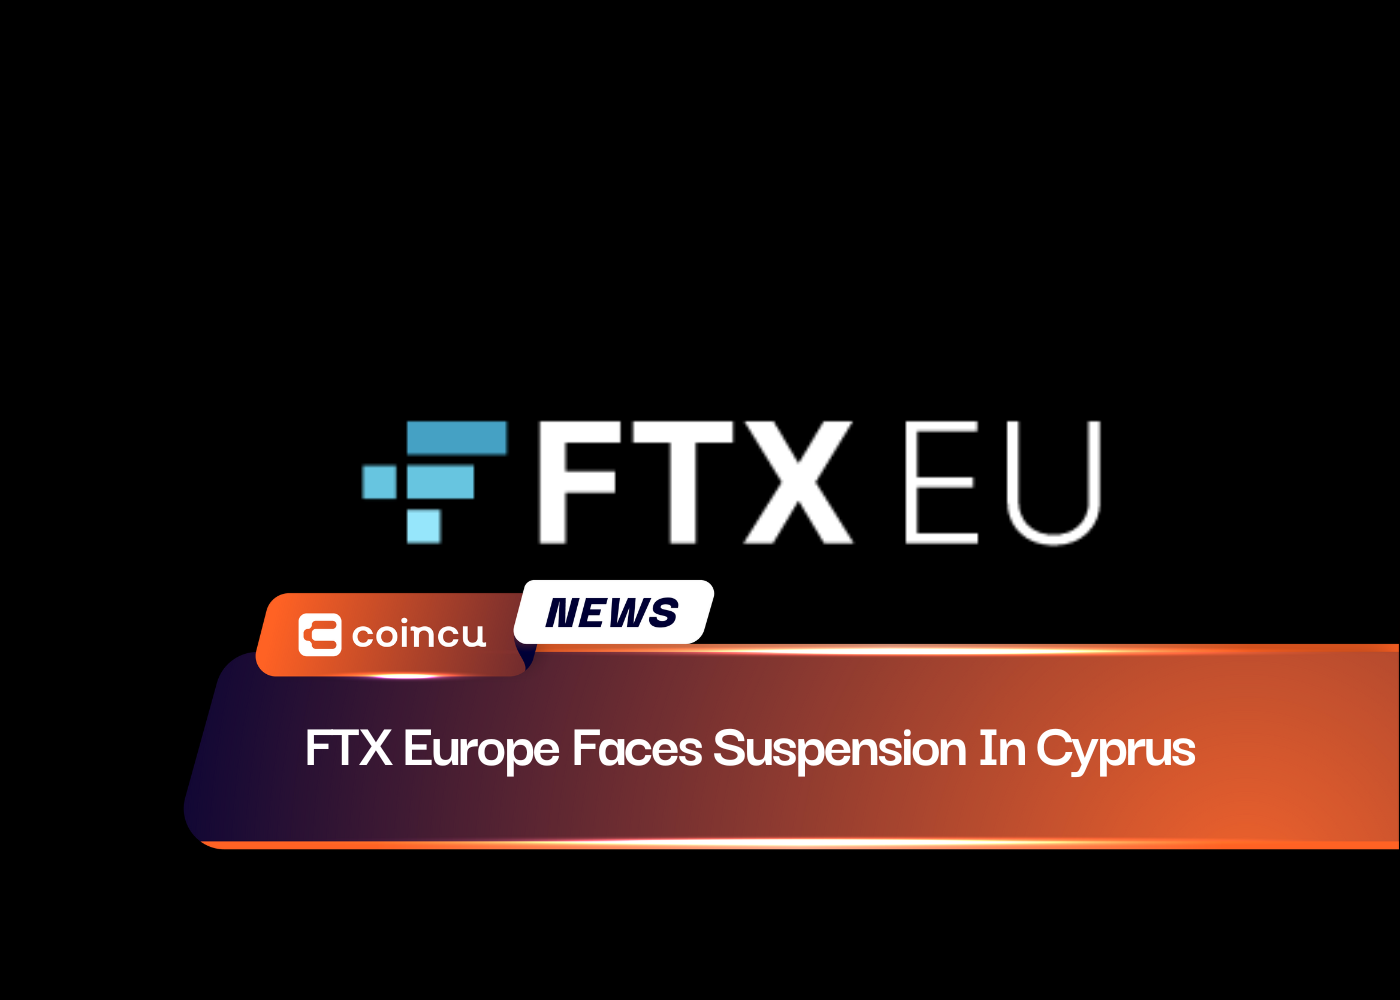 FTX Europe Faces Suspension In Cyprus